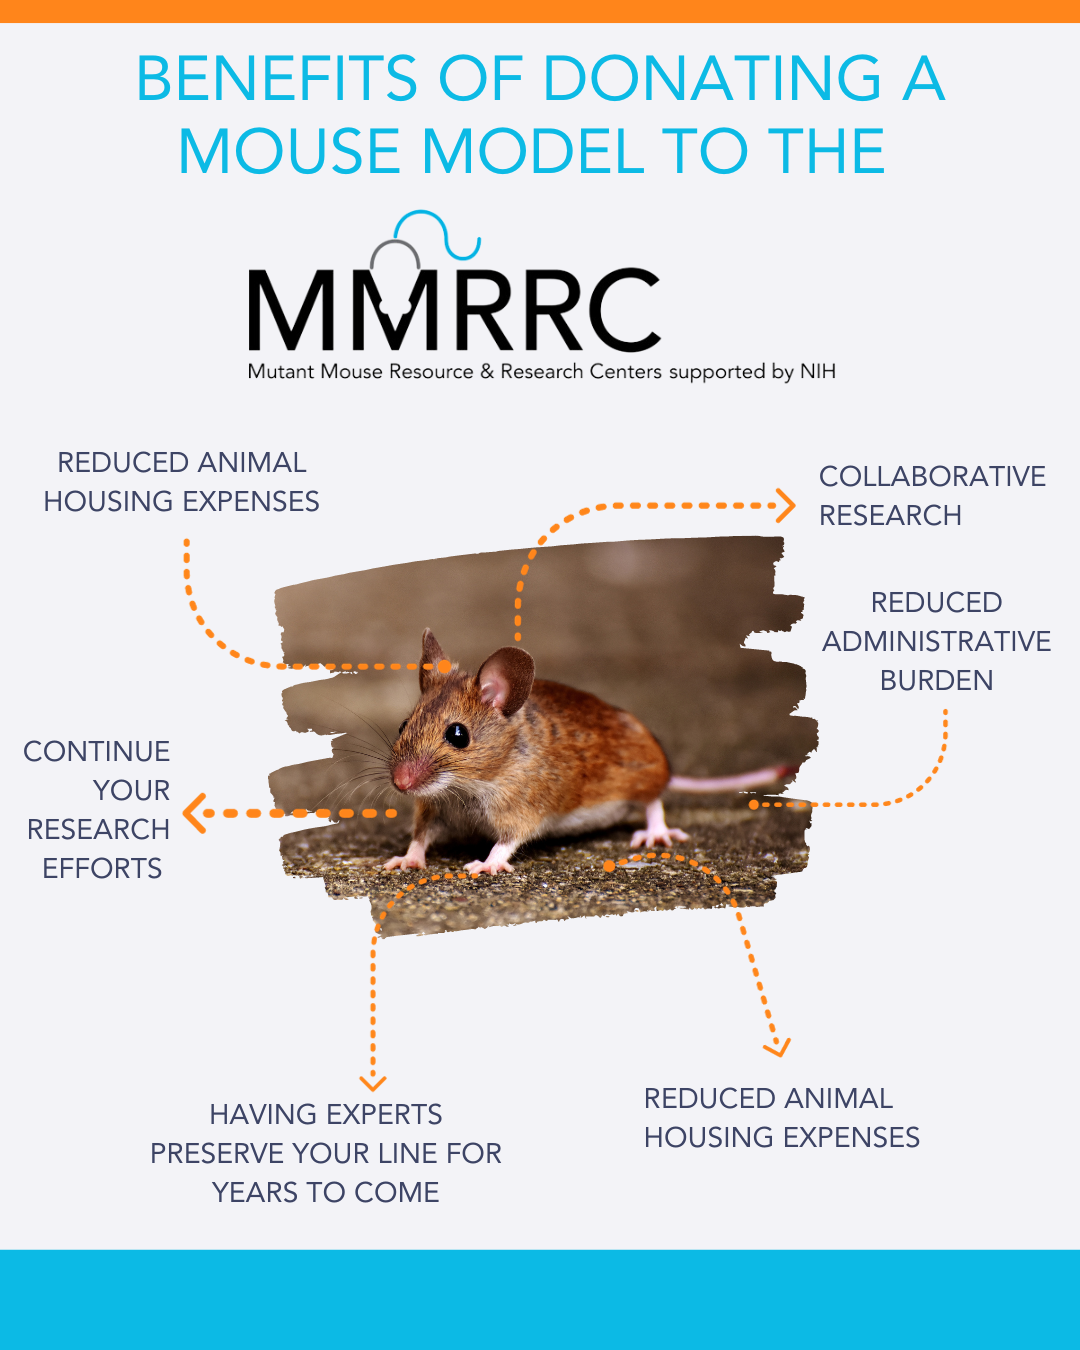 Visual representation of the benefits of donating your mouse strain